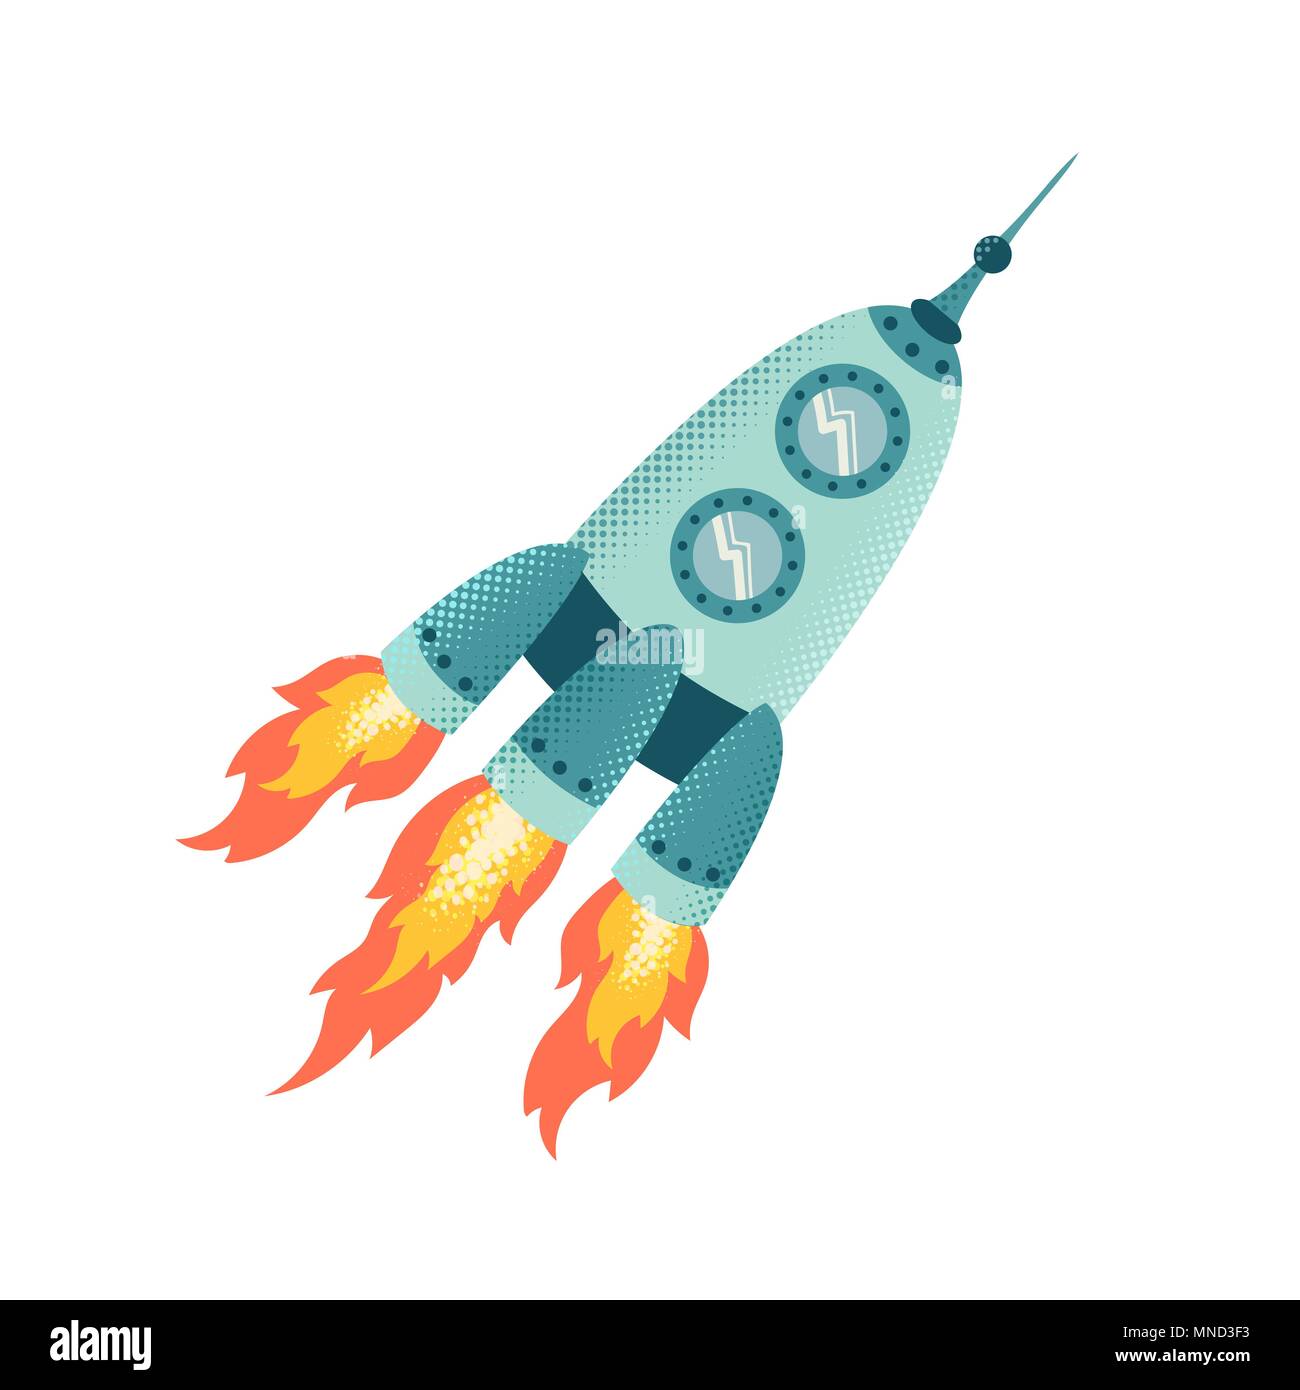 Retro rocket vector illustration, halftone and mid century comics graphic style spacecraft isolated on white, spaceship successfull startup with fire  Stock Vector